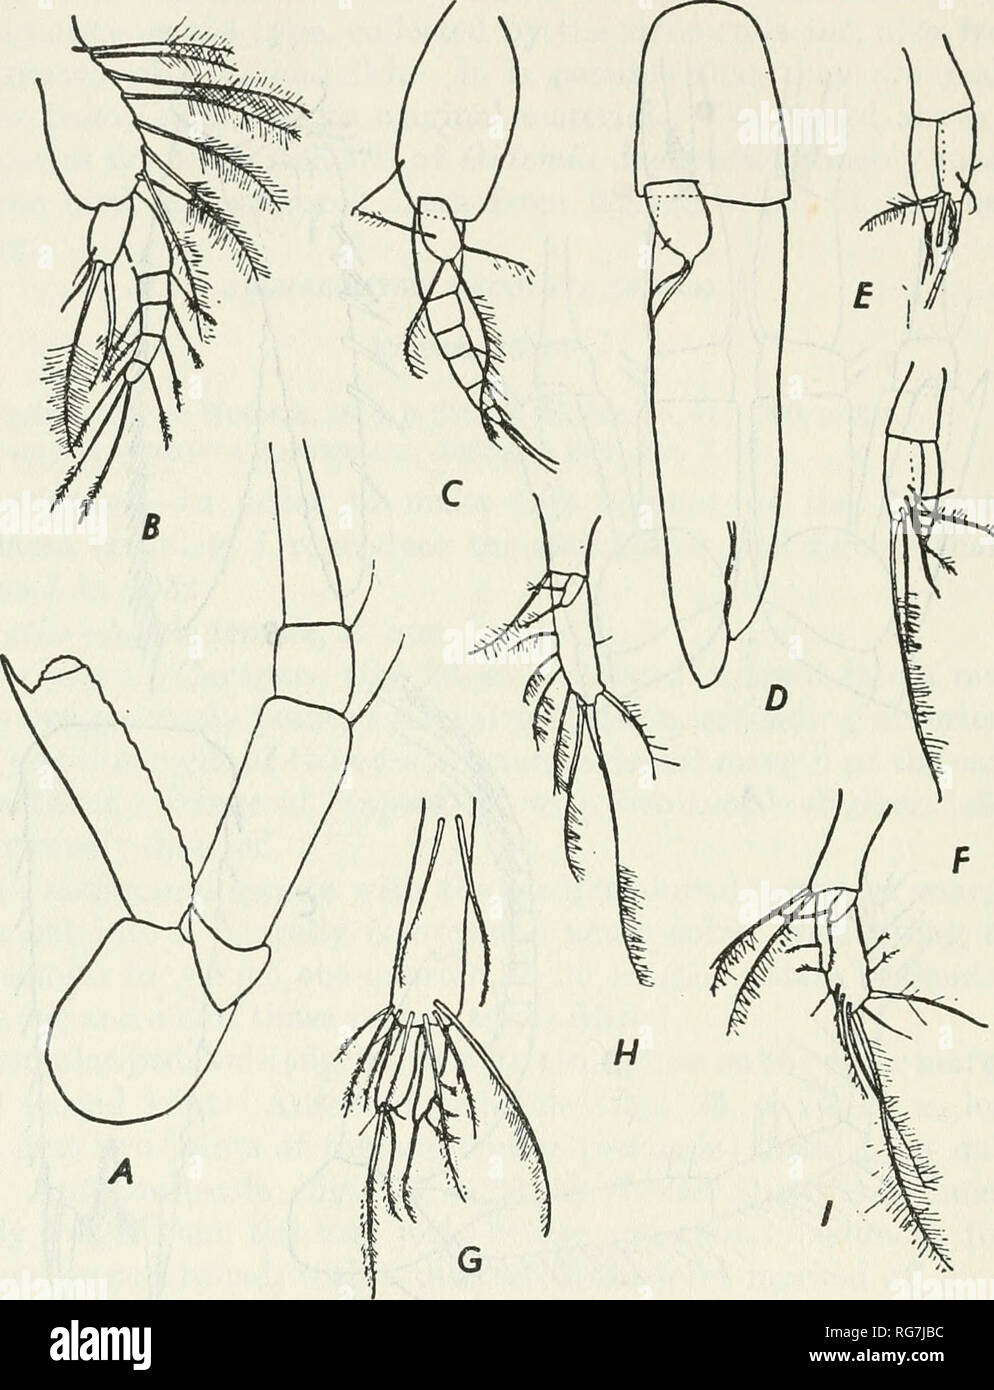 . Bulletin - United States National Museum. Science. 88 BULLETIN 2 01, UNITED STATEiS NATIONAL MUSEUM Pleopods of the female all biramous; in the first pair (fig. 24, g) the rami are less than half as long as the peduncle, equal in length, and armed with a few plumose setae; the distal margin of the basal joint armed with several very long plumose setae; in the remaining. Figure 24.—Archaeomysis maculata (Holmes): a, Antennal scale and peduncle, X 78; b, first pleopod of male, X 100; c, second pleopod of male, X 100; d, third pleopod of male, X 100; e, fourth pleopod of male, X 100;/, fifth pl Stock Photo